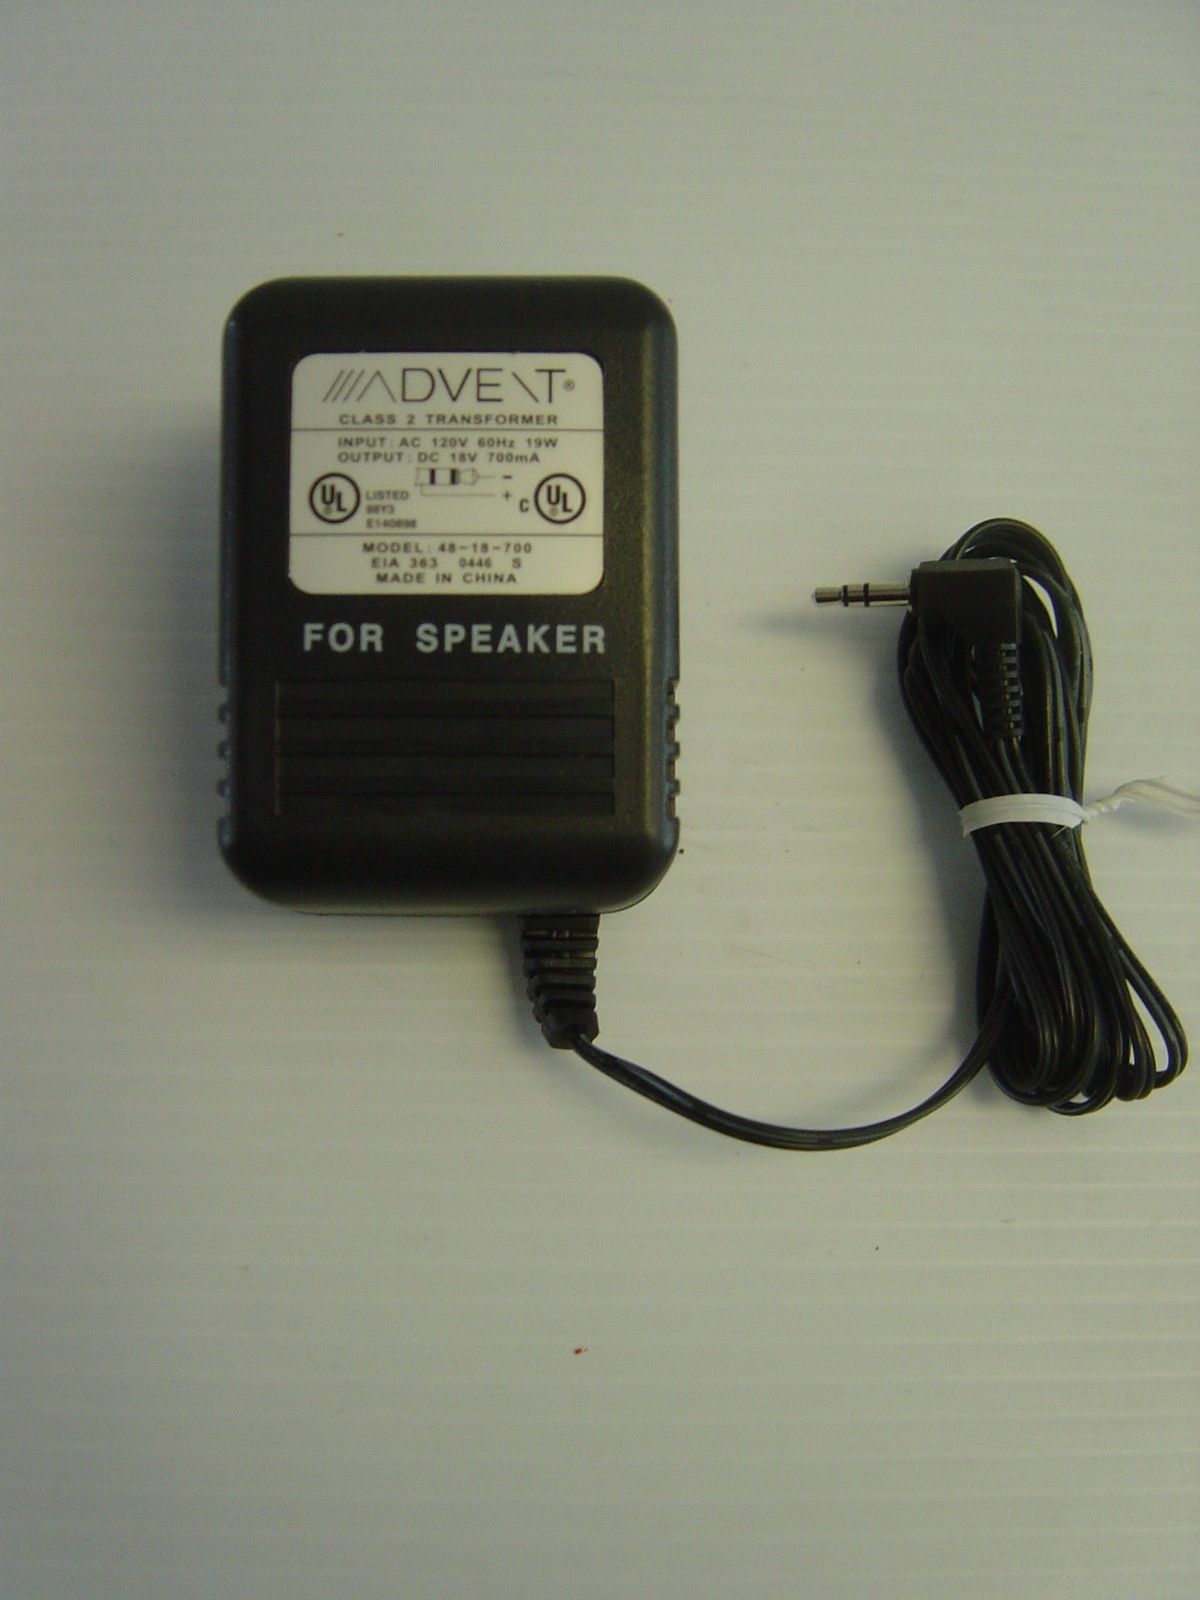 New Advent 48-18-700 18V 700mA POWER SUPPLY ADAPTER Subwoofer 3.5MM transformer charger for speaker